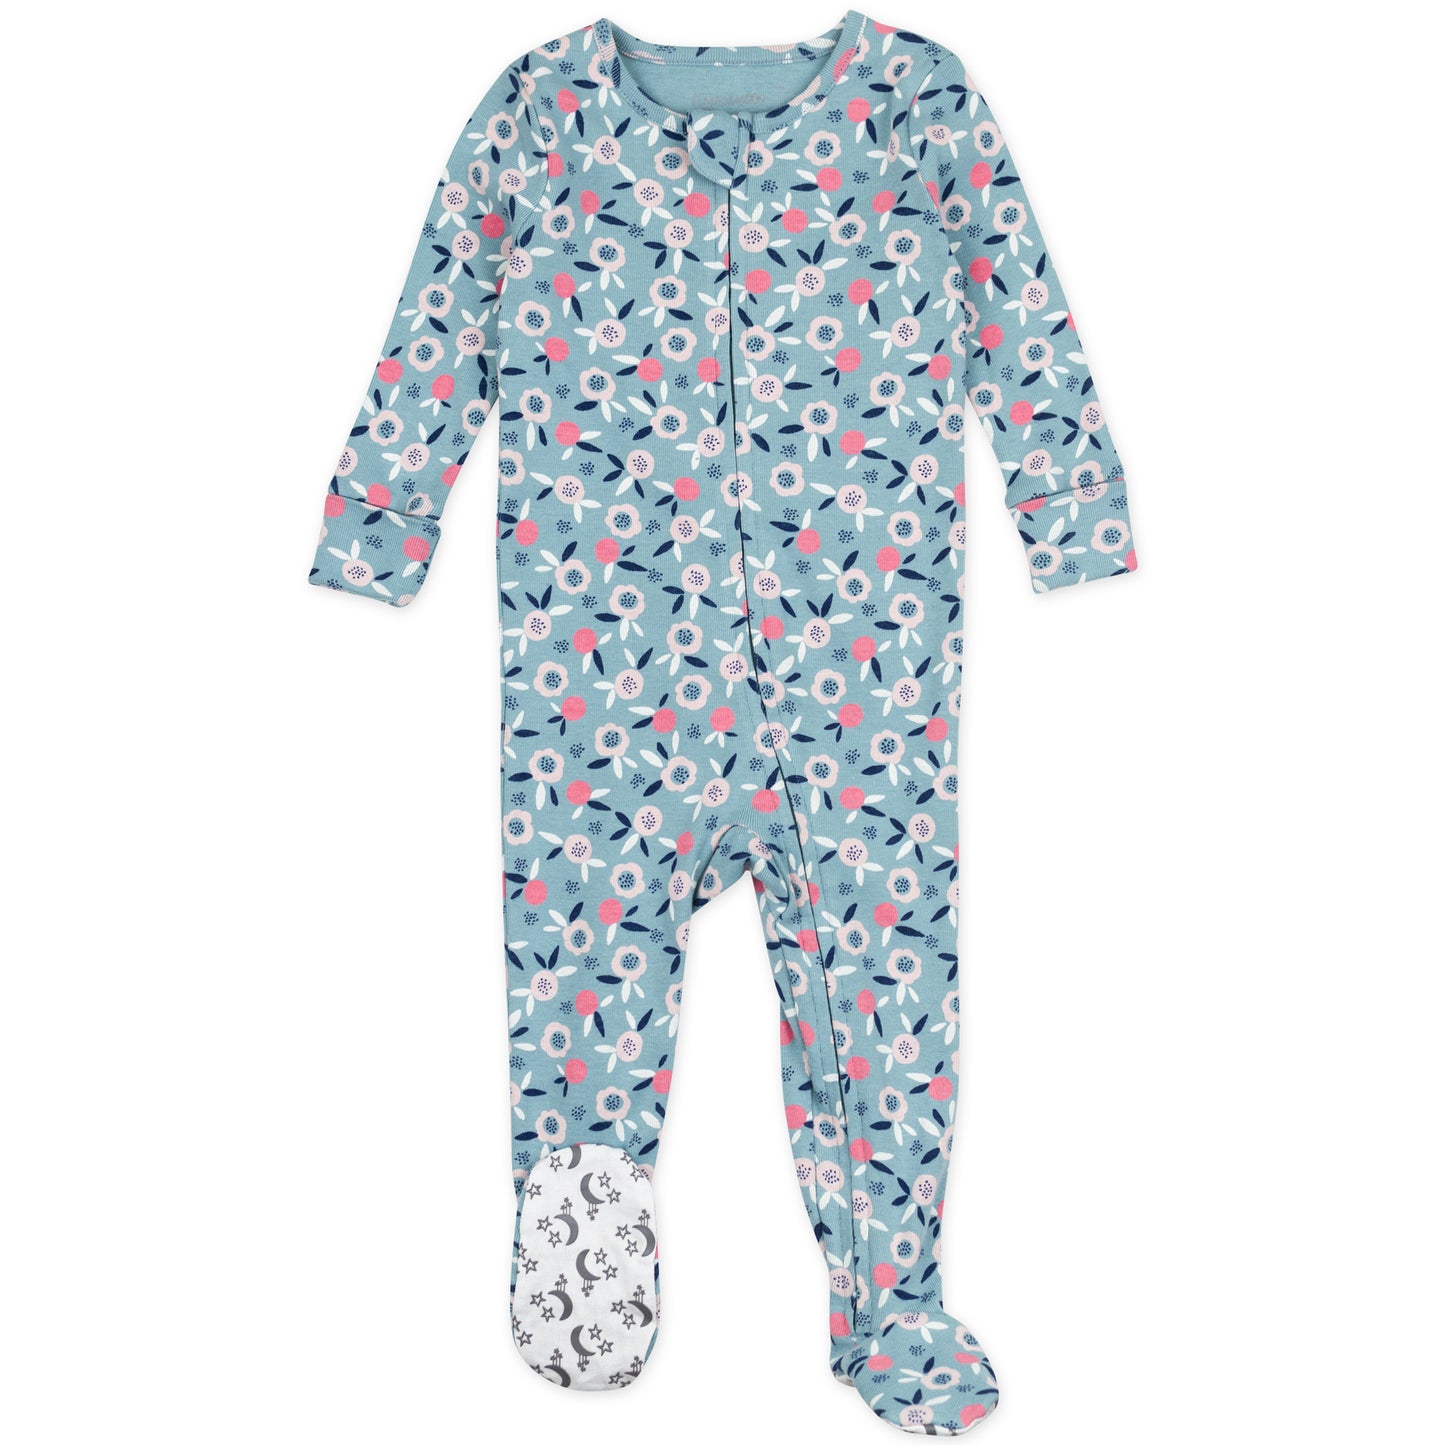 2-Pack Organic Cotton Footed Pajamas in Bunny Floral Print